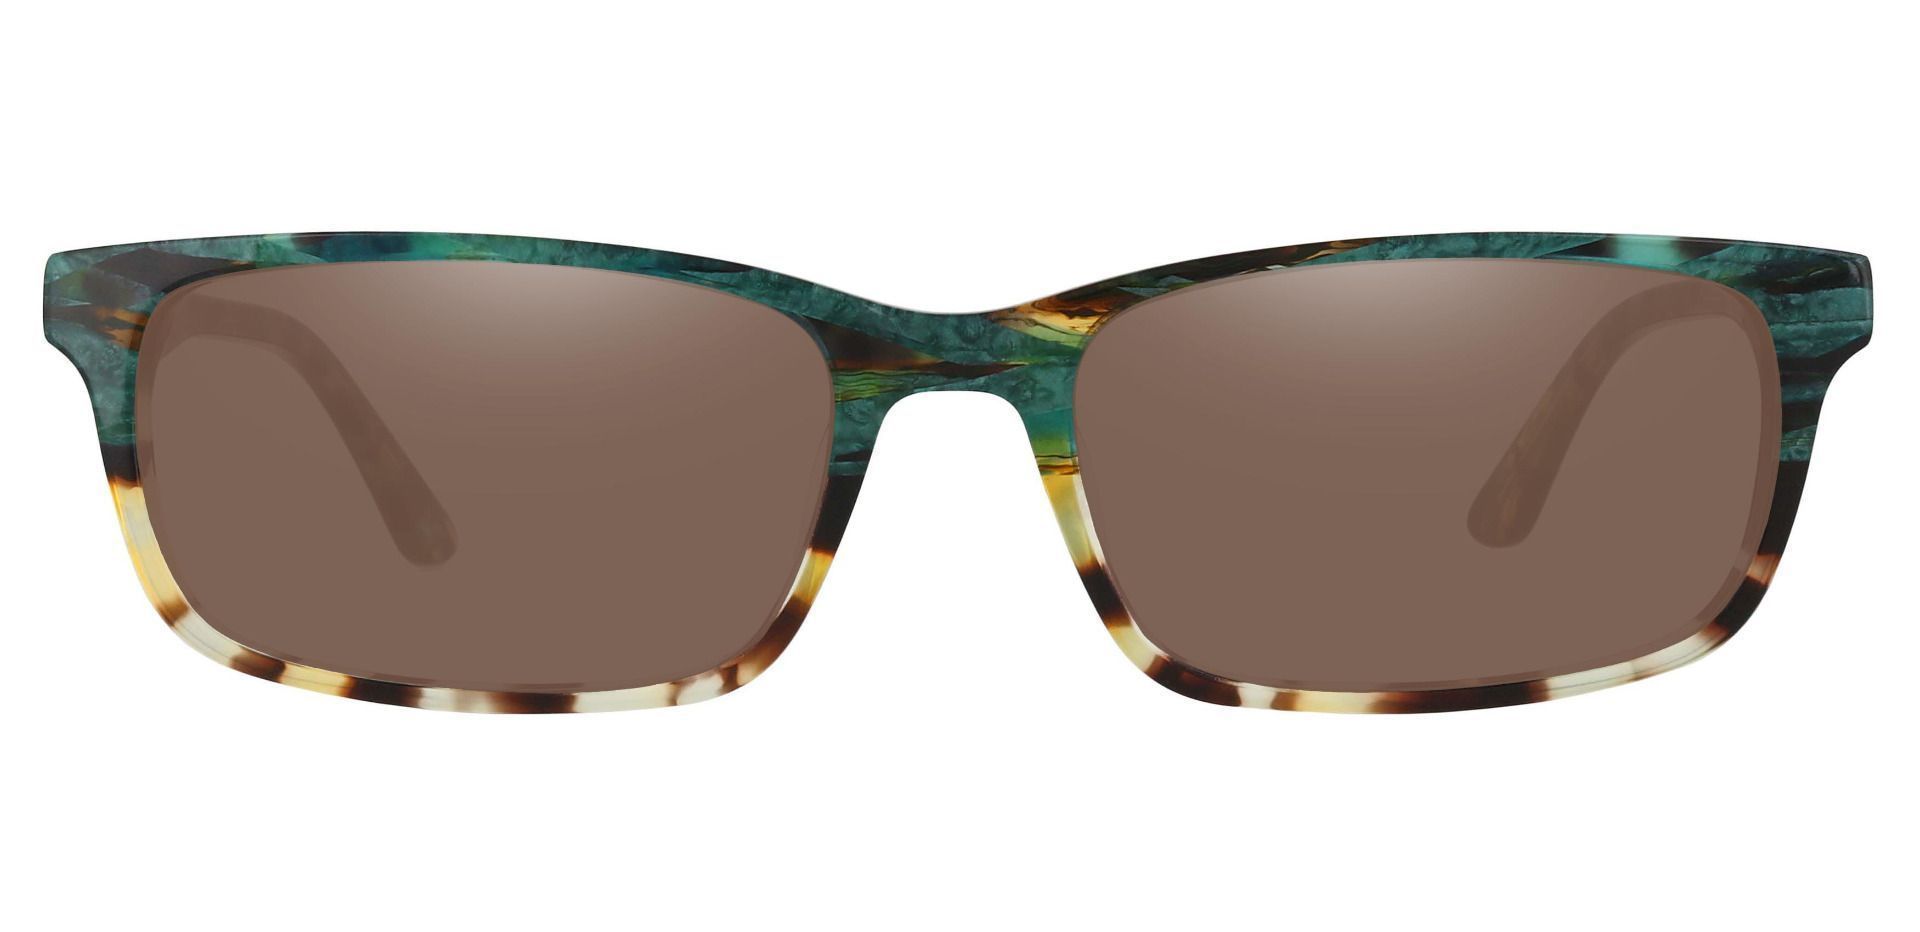 Hendrix Rectangle Reading Sunglasses - Floral Frame With Brown Lenses